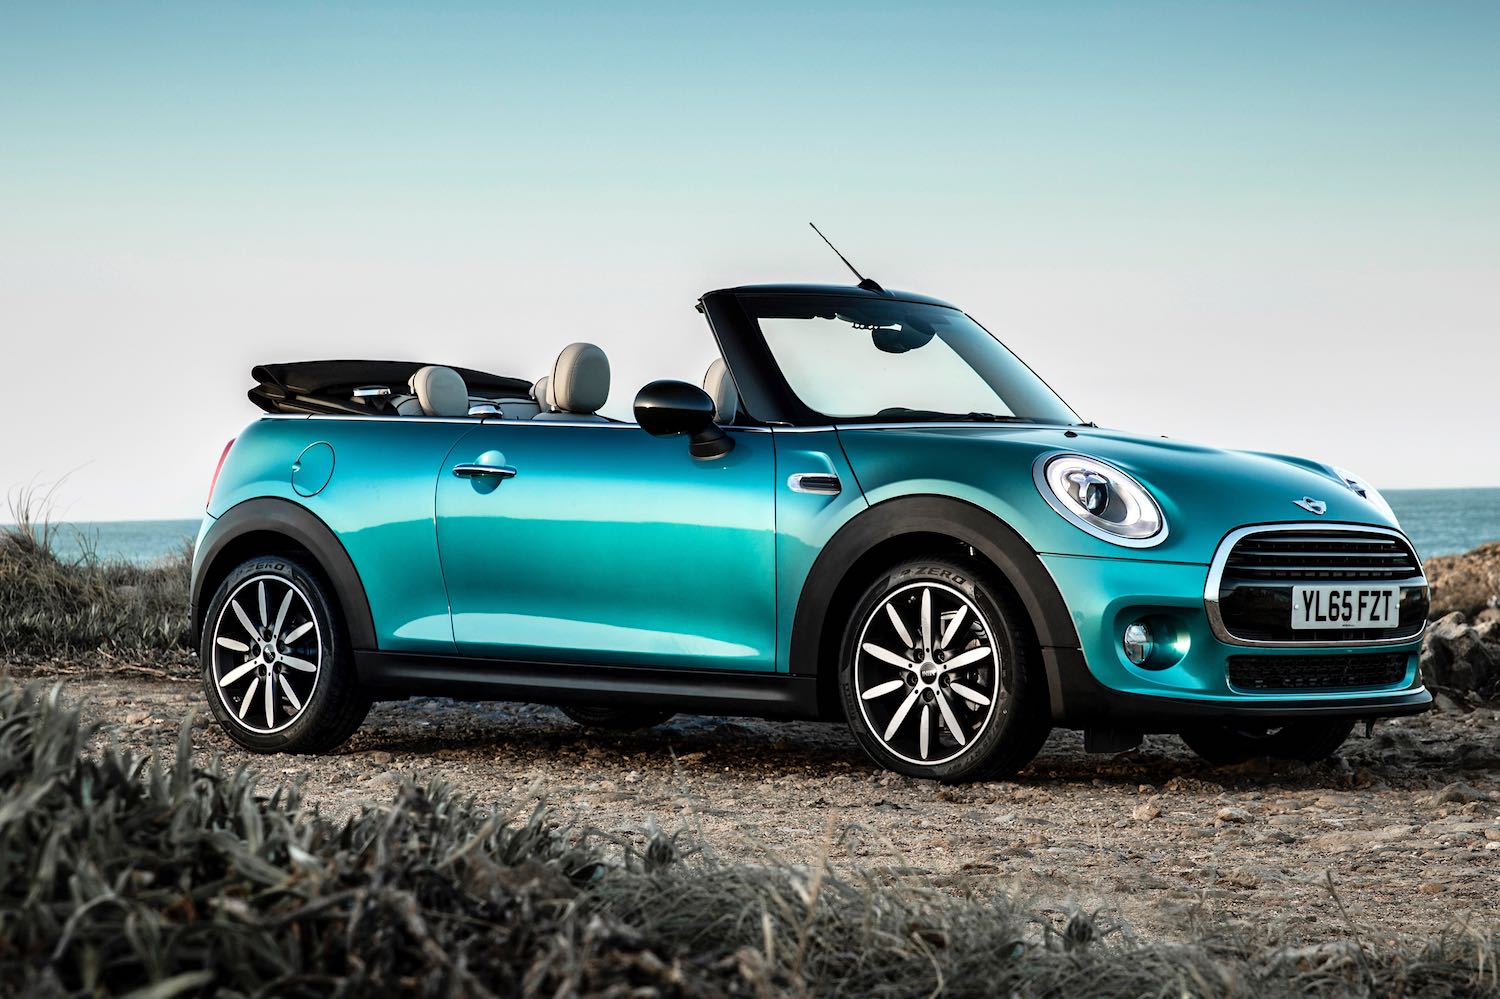 Neil Lyndon reviews the Best selling open top MINI Cooper Convertible for Drive 20